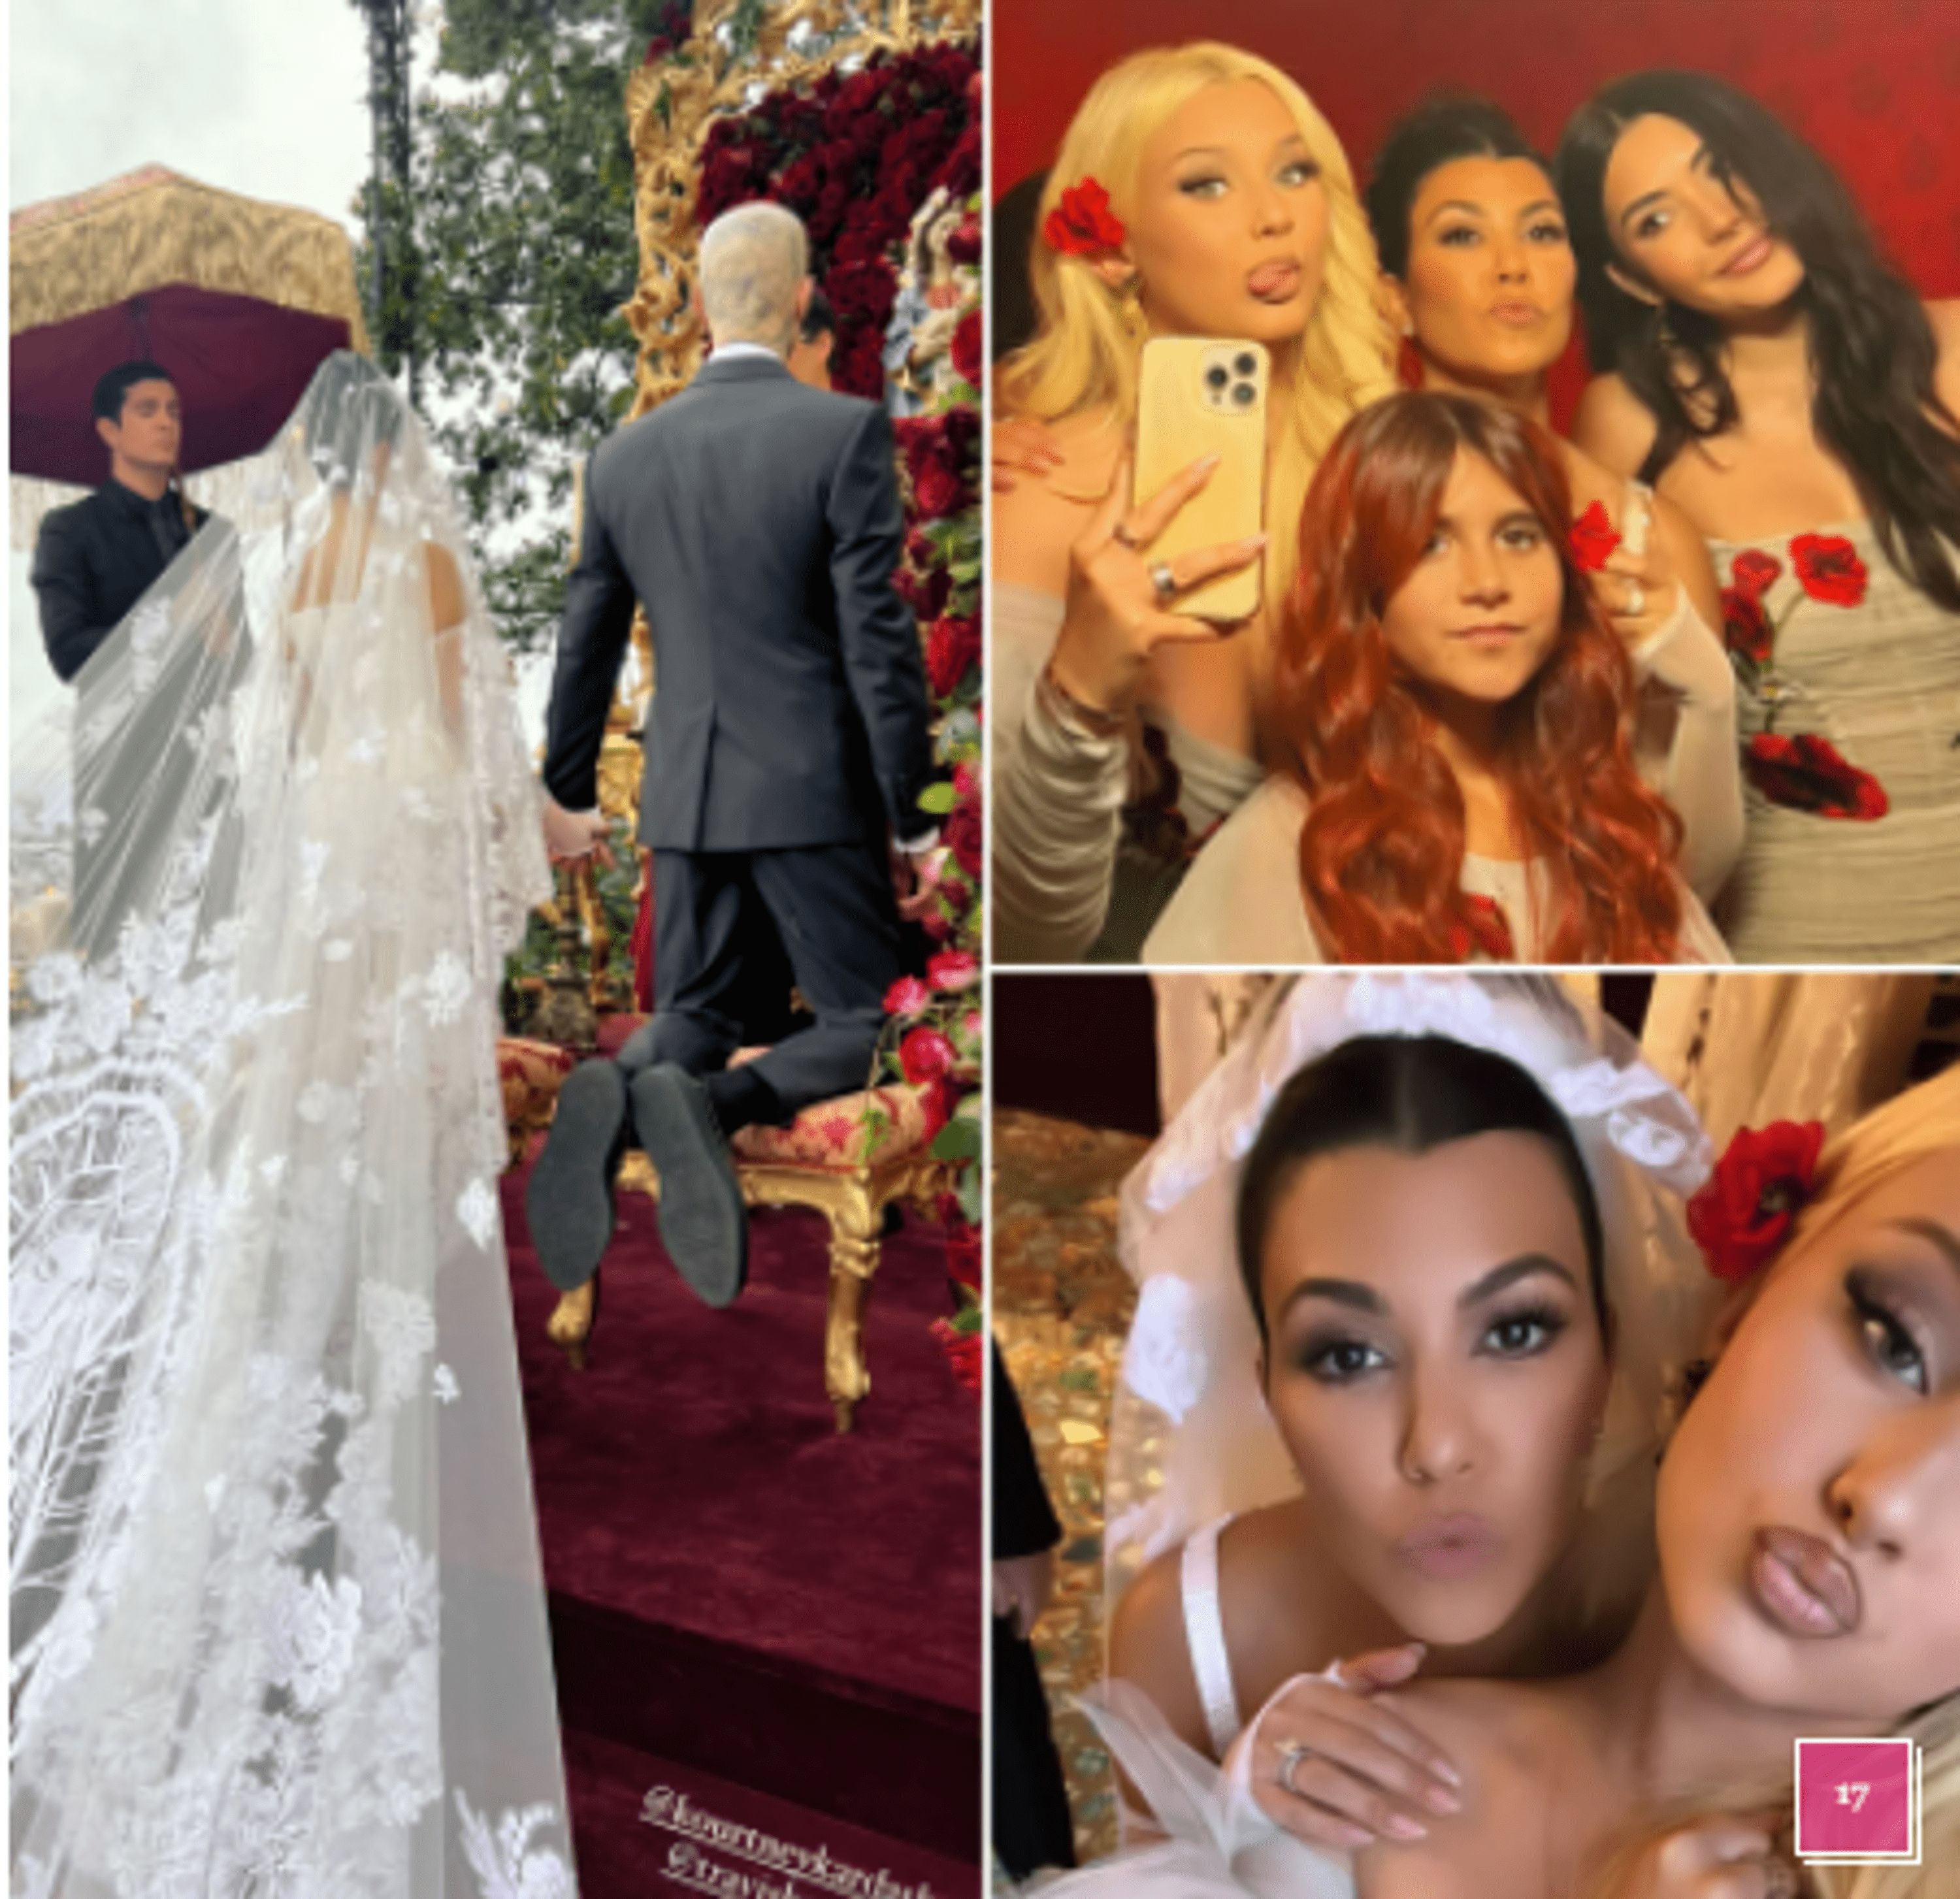 ”on-the-eve-of-the-wedding-kourtney-kardashian-and-travis-barker-went-on-vacation-to-italy”